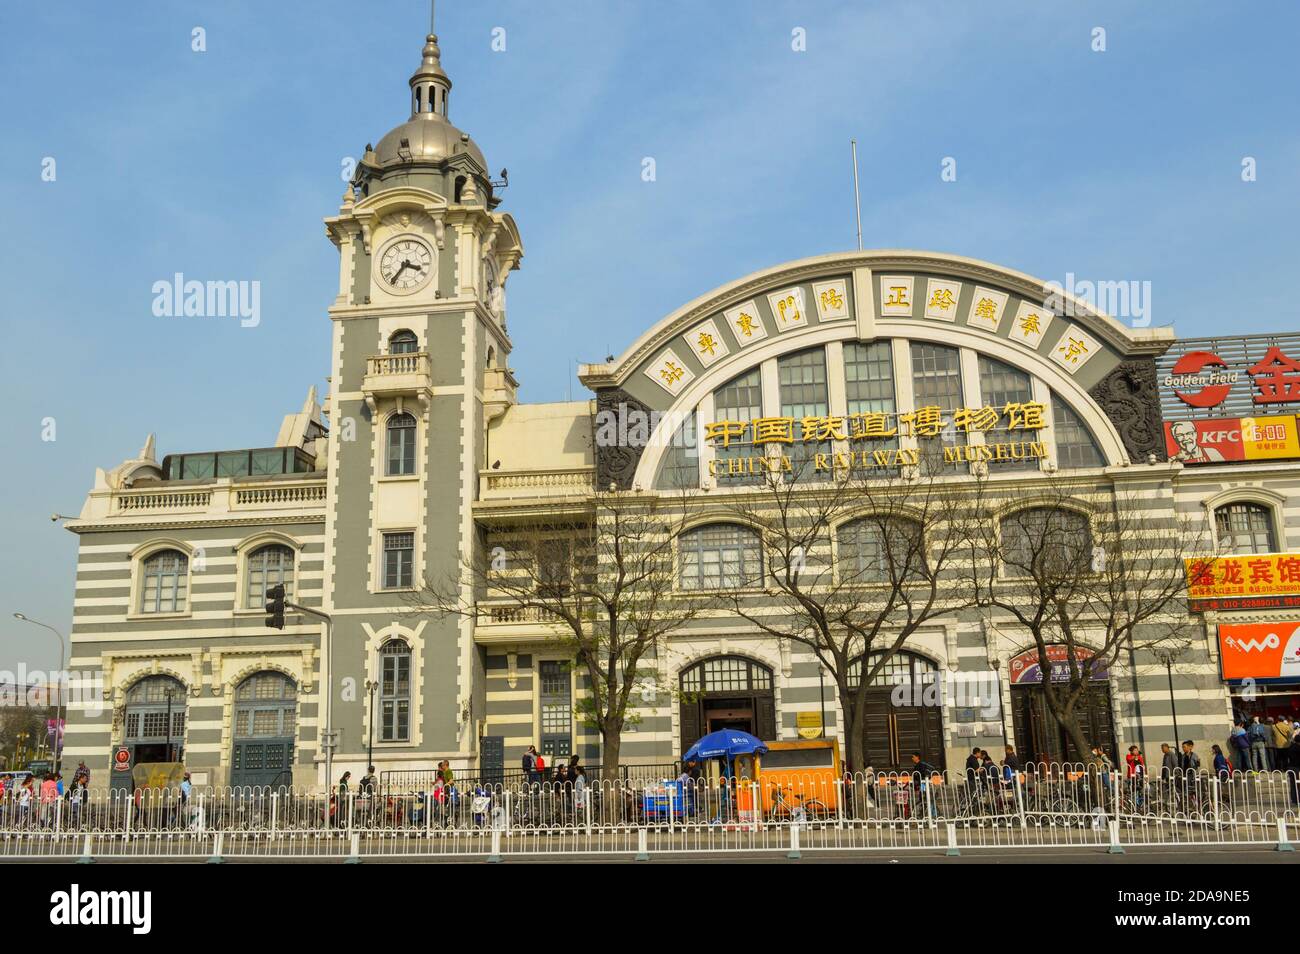 Beijing / China - April 6, 2014: China Railway Museum, a specialized museum of the railways of China. Founded in 1978, it is located on the southeast Stock Photo